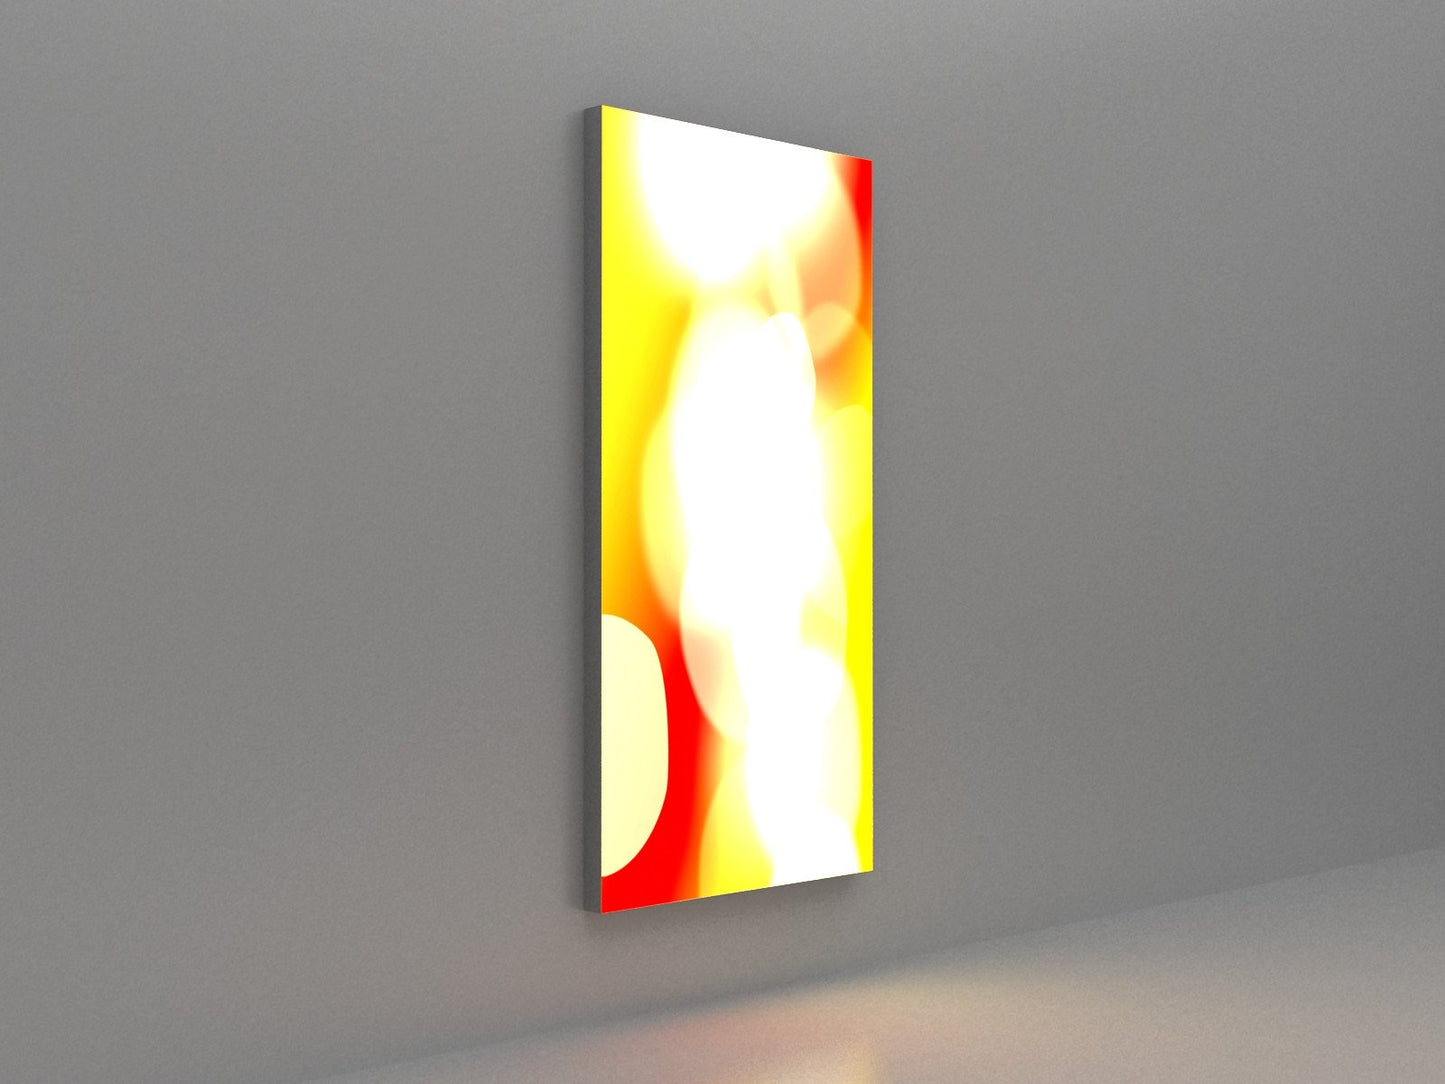 Fabric Faced Wall Mounted Light Box